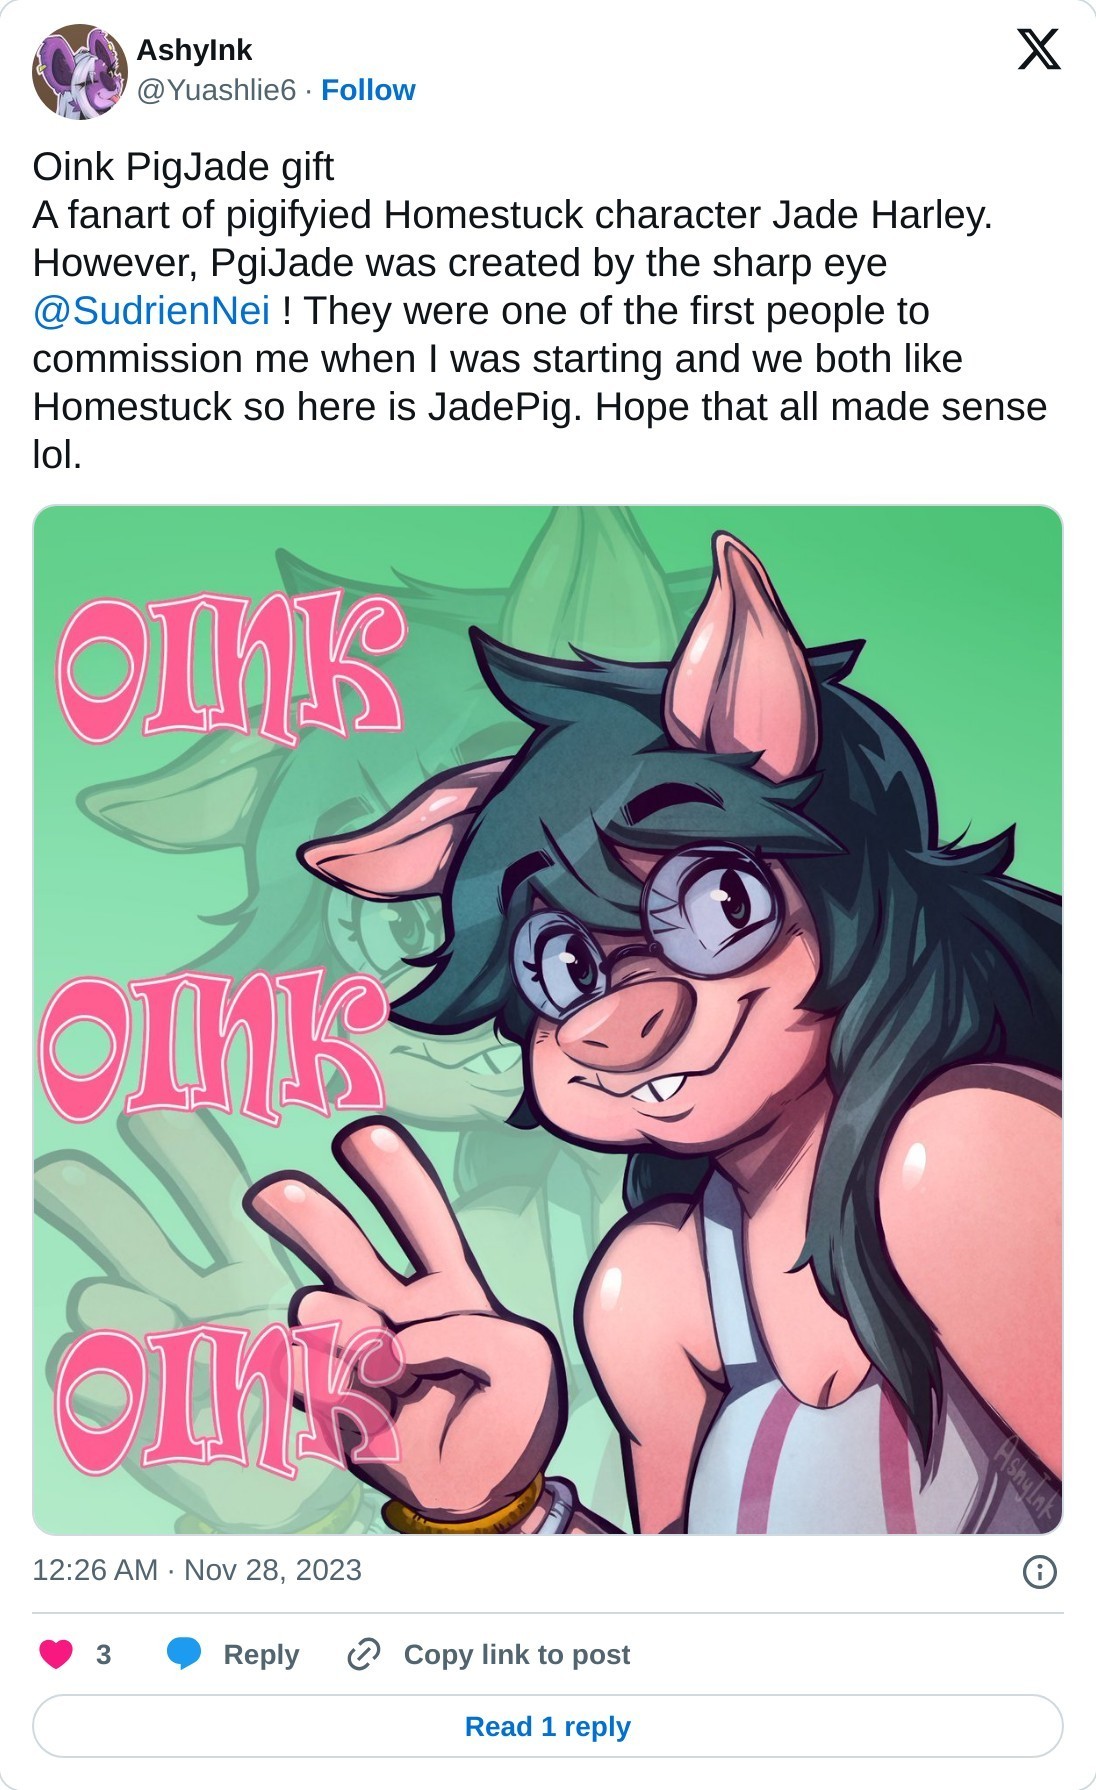 Oink PigJade gift A fanart of pigifyied Homestuck character Jade Harley. However, PgiJade was created by the sharp eye @SudrienNei ! They were one of the first people to commission me when I was starting and we both like Homestuck so here is JadePig. Hope that all made sense lol. pic.twitter.com/p81SGoBQbN  — AshyInk (@Yuashlie6) November 28, 2023